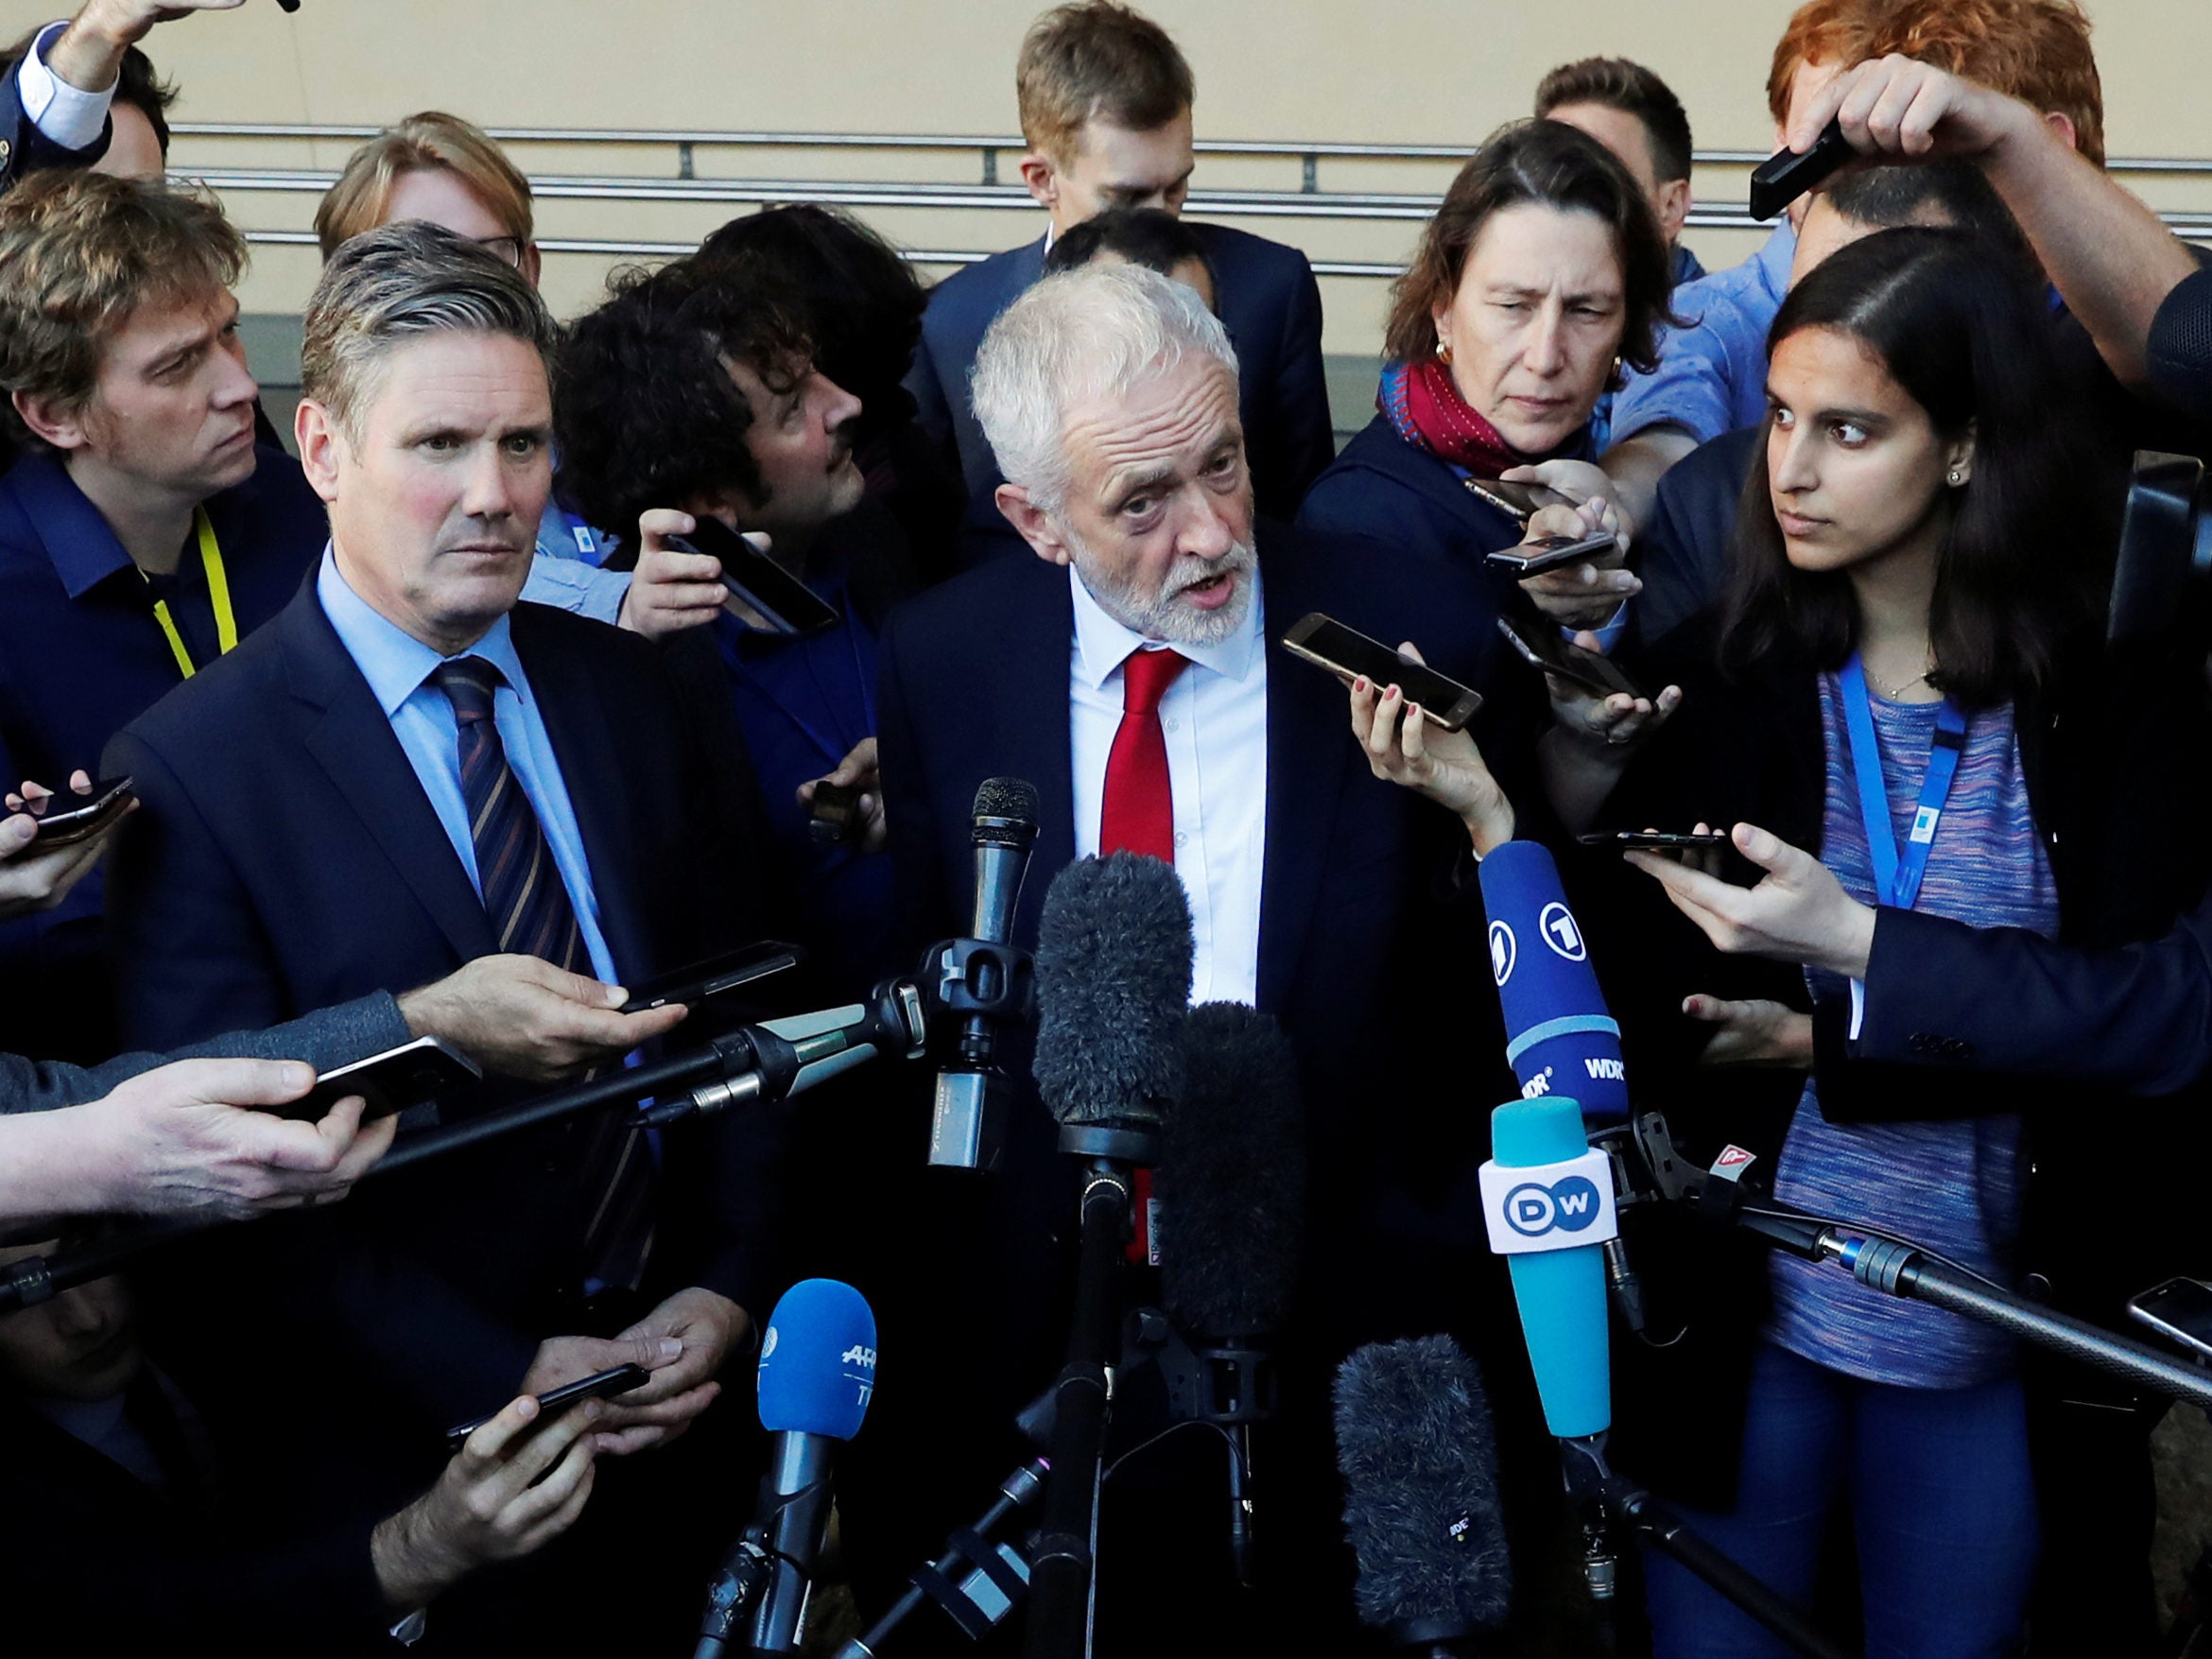 Labour, Tories and SNP named in report on threats to journalists for 'political interference' with media